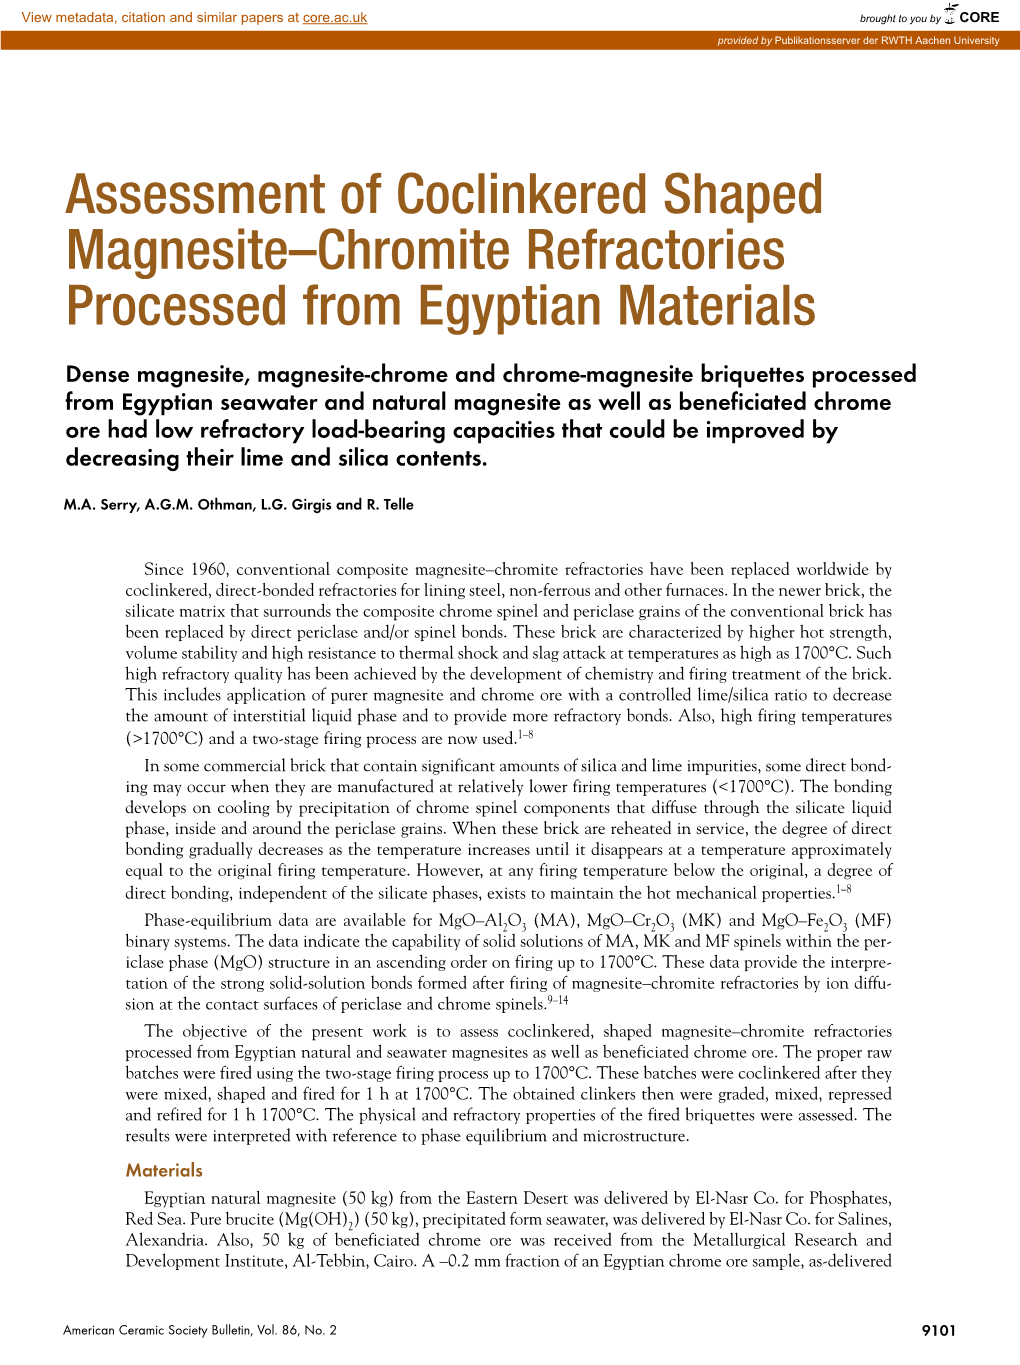 Assessment of Coclinkered Shaped Magnesite–Chromite Refractories